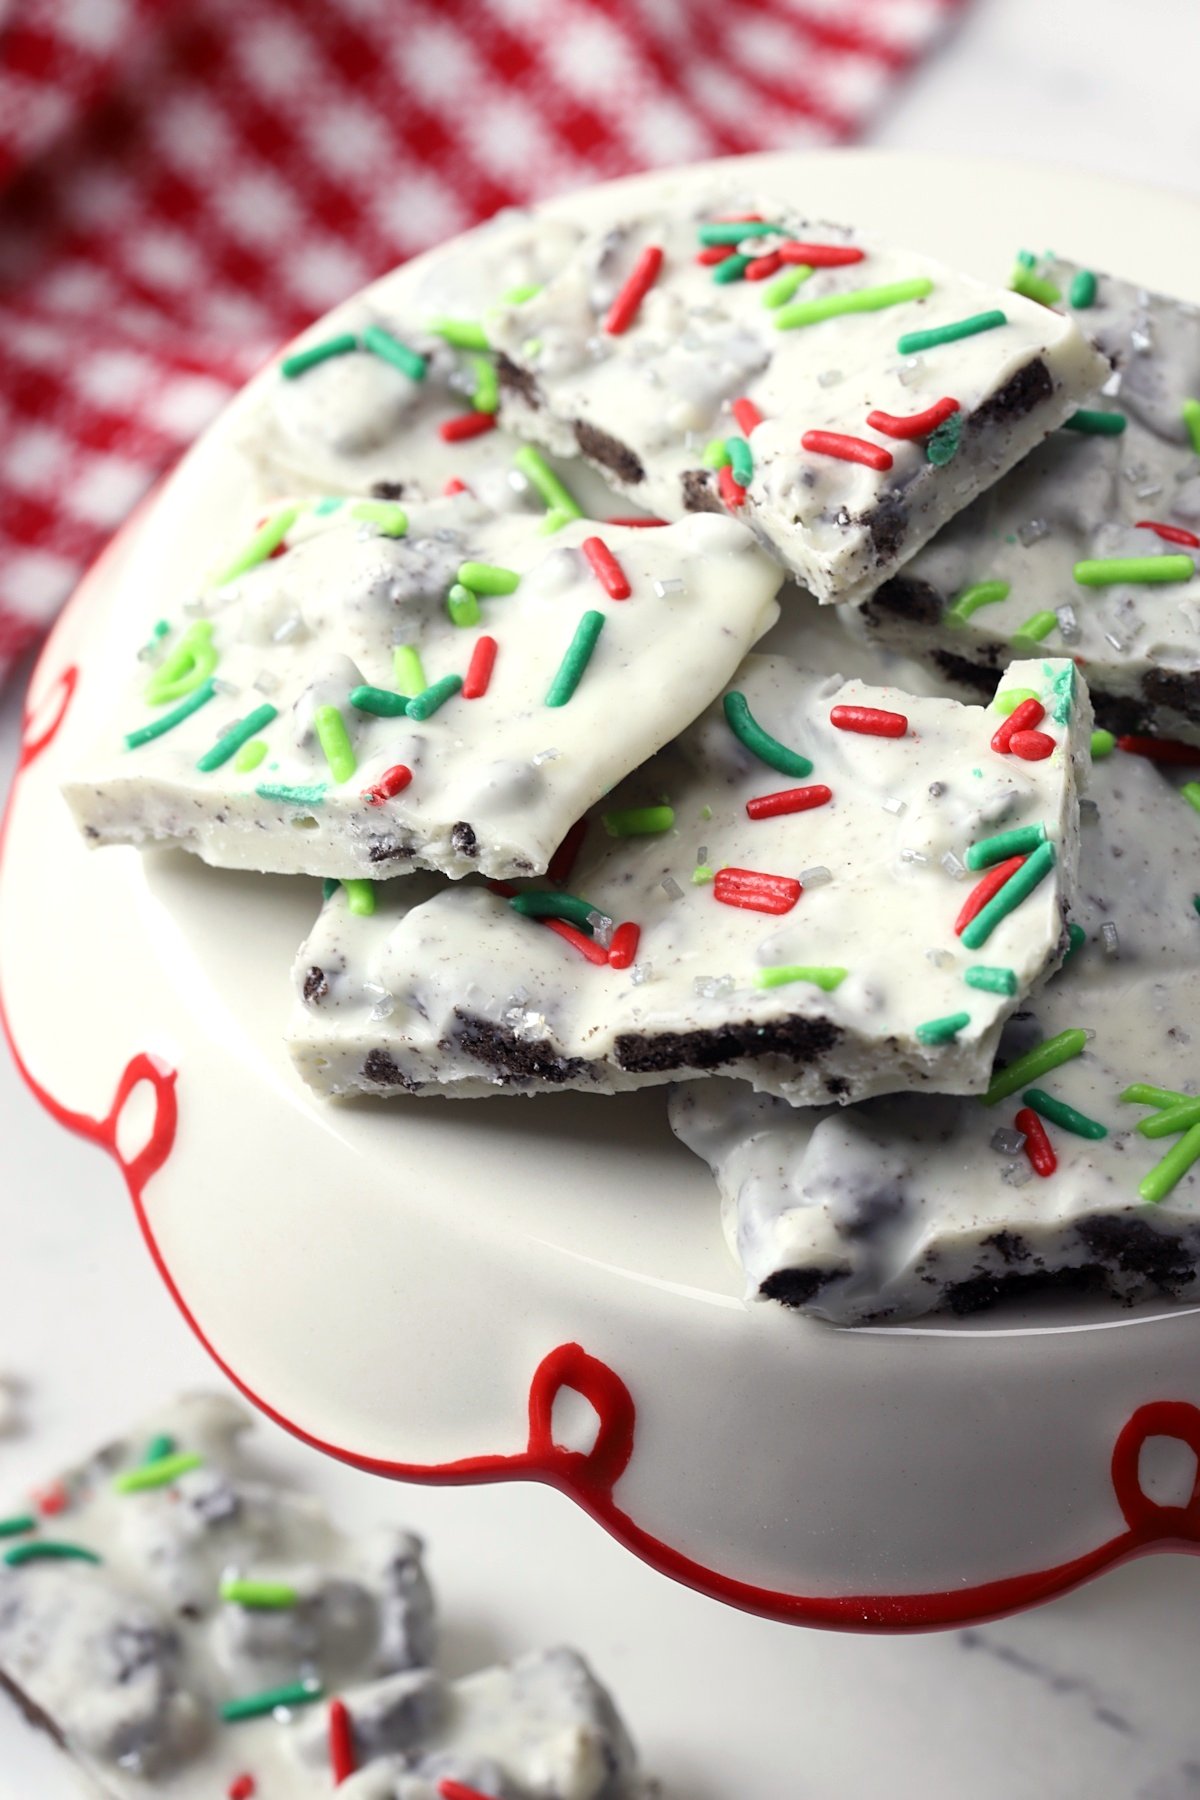 Oreo bark on a decorative serving plate.